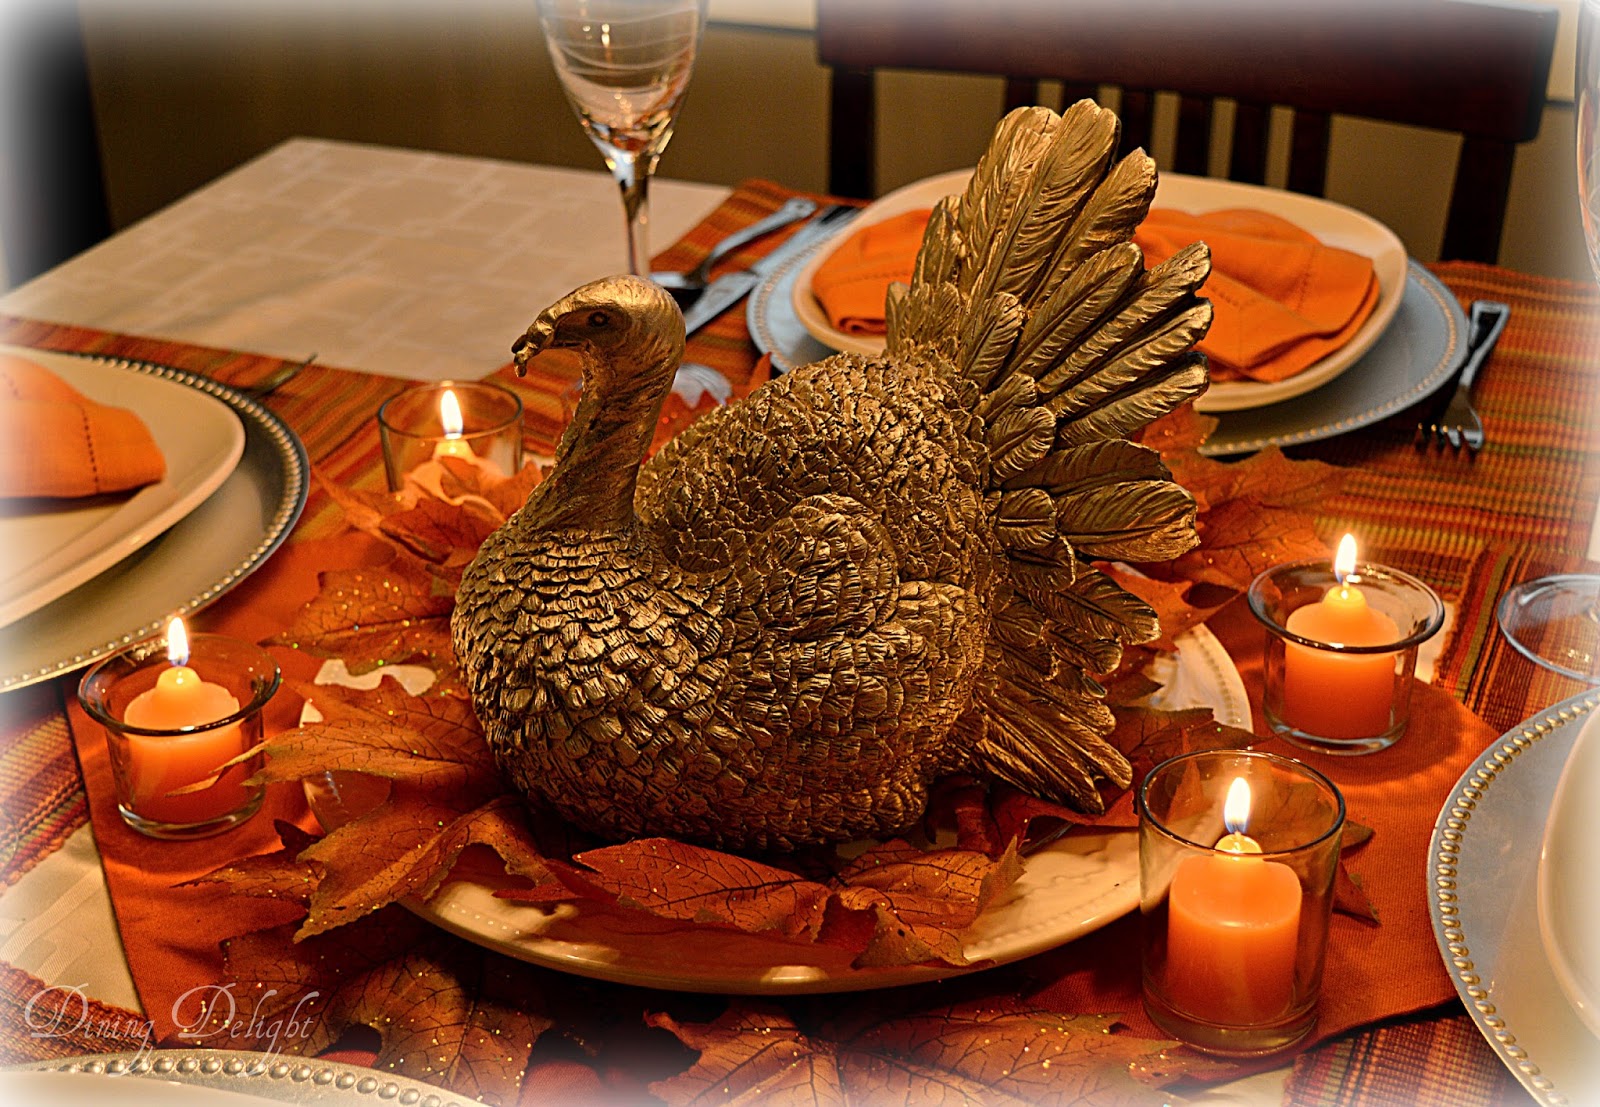 Dining Delight: It's Thanksgiving in Canada!